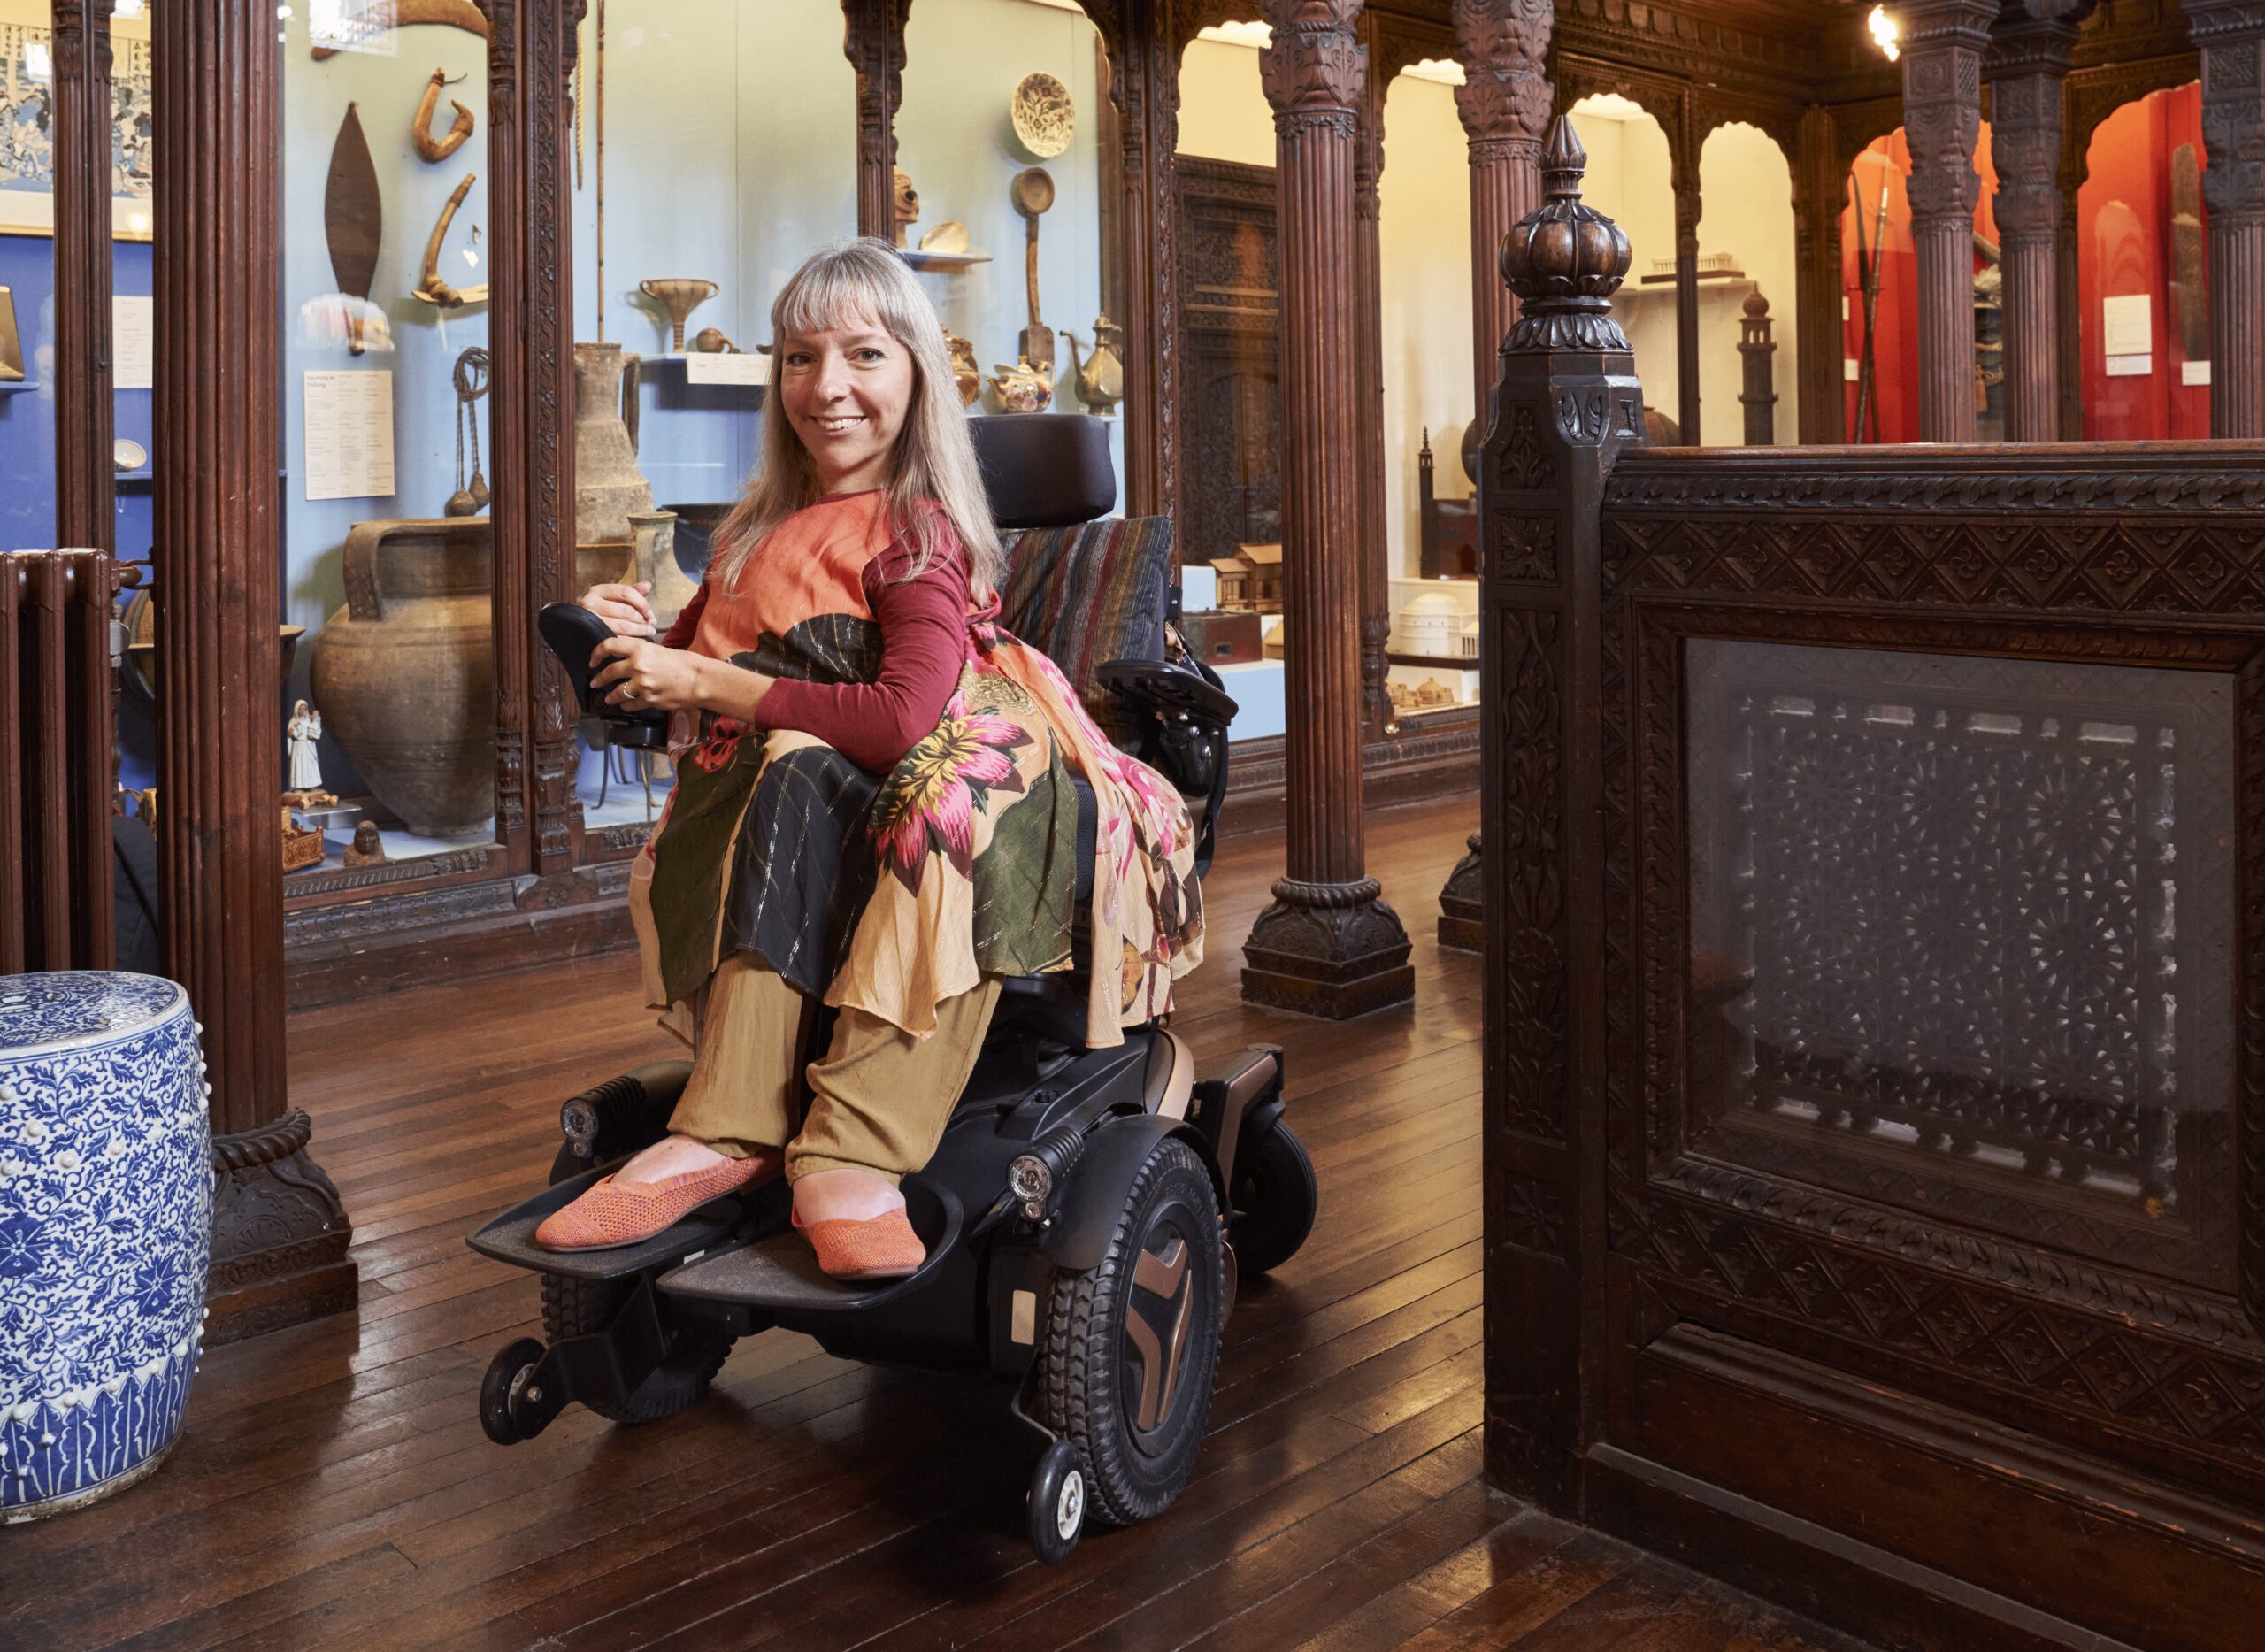 A full length photo of a white woman in her late 40’s with shoulder length silver blonde hair. She is a wheelchair user, and is smiling at the camera. She is in a museum setting, with dark wood columns and cabinets showing historic objects visible behind her.